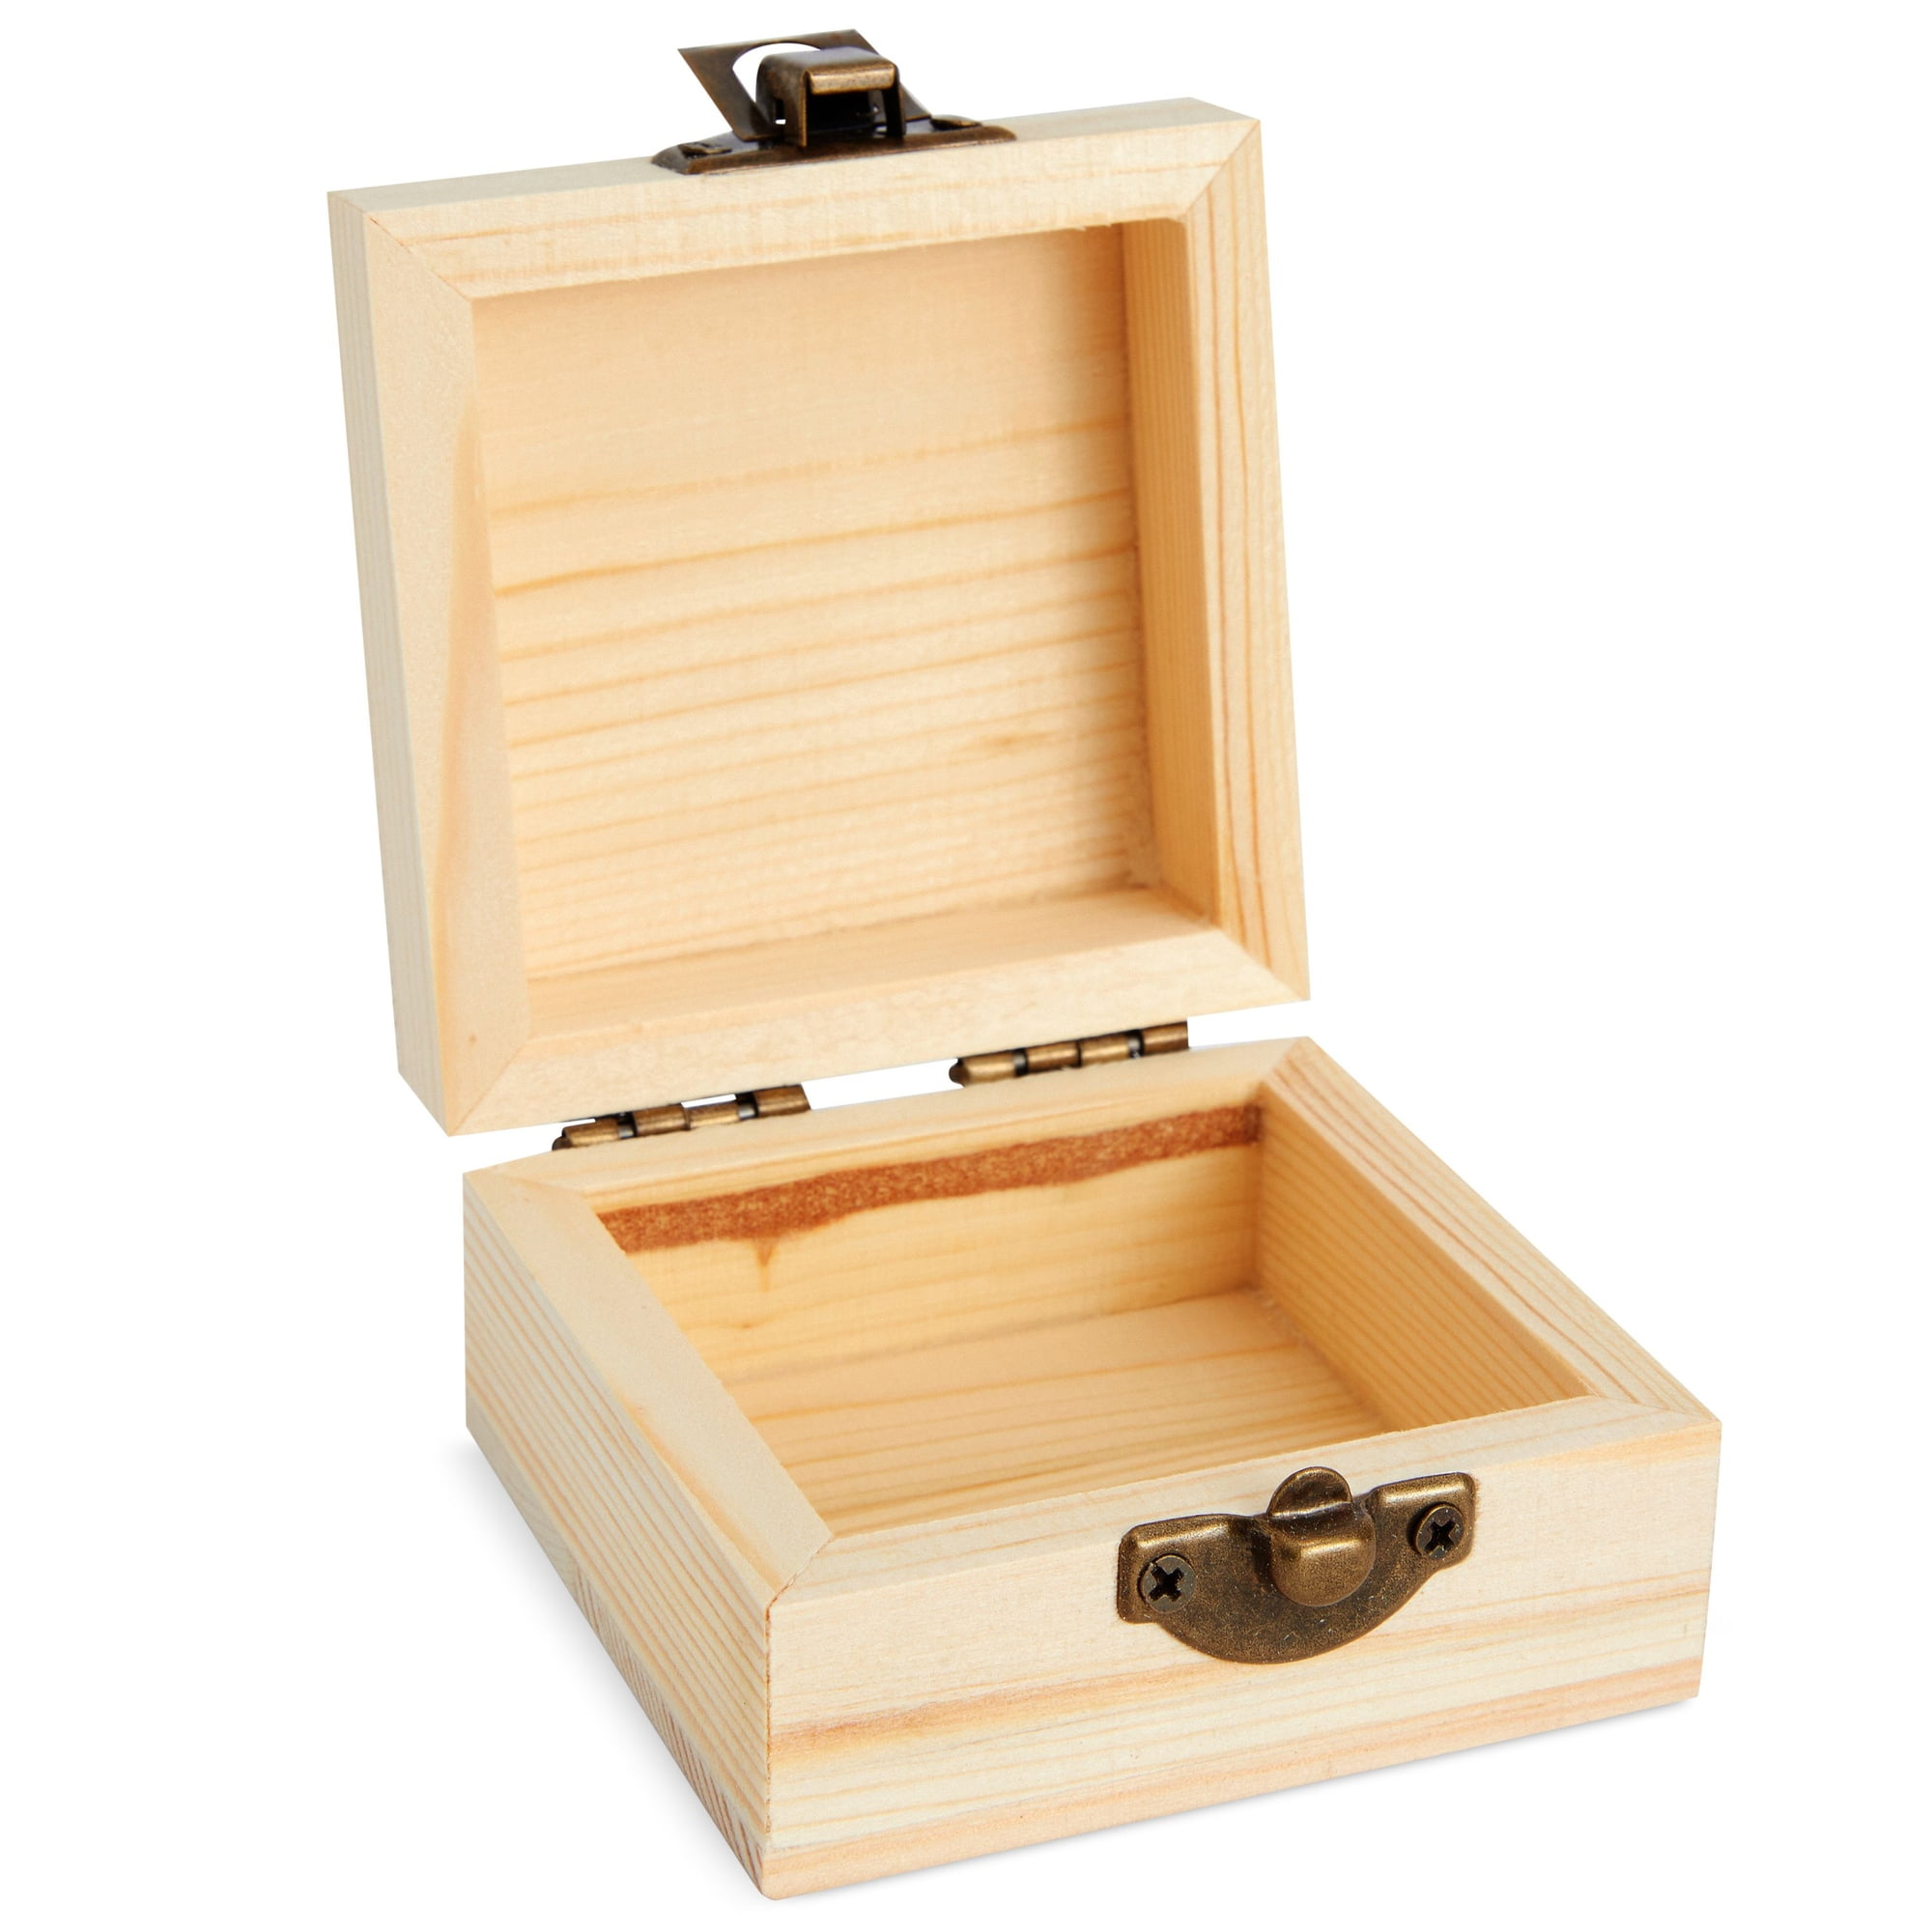 12 Pack Small Wooden Boxes For Crafts, Unfinished Wood Jewelry Boxes DIY  (2.7 x 2.7 x 1.6 In) - On Sale - Bed Bath & Beyond - 37388419